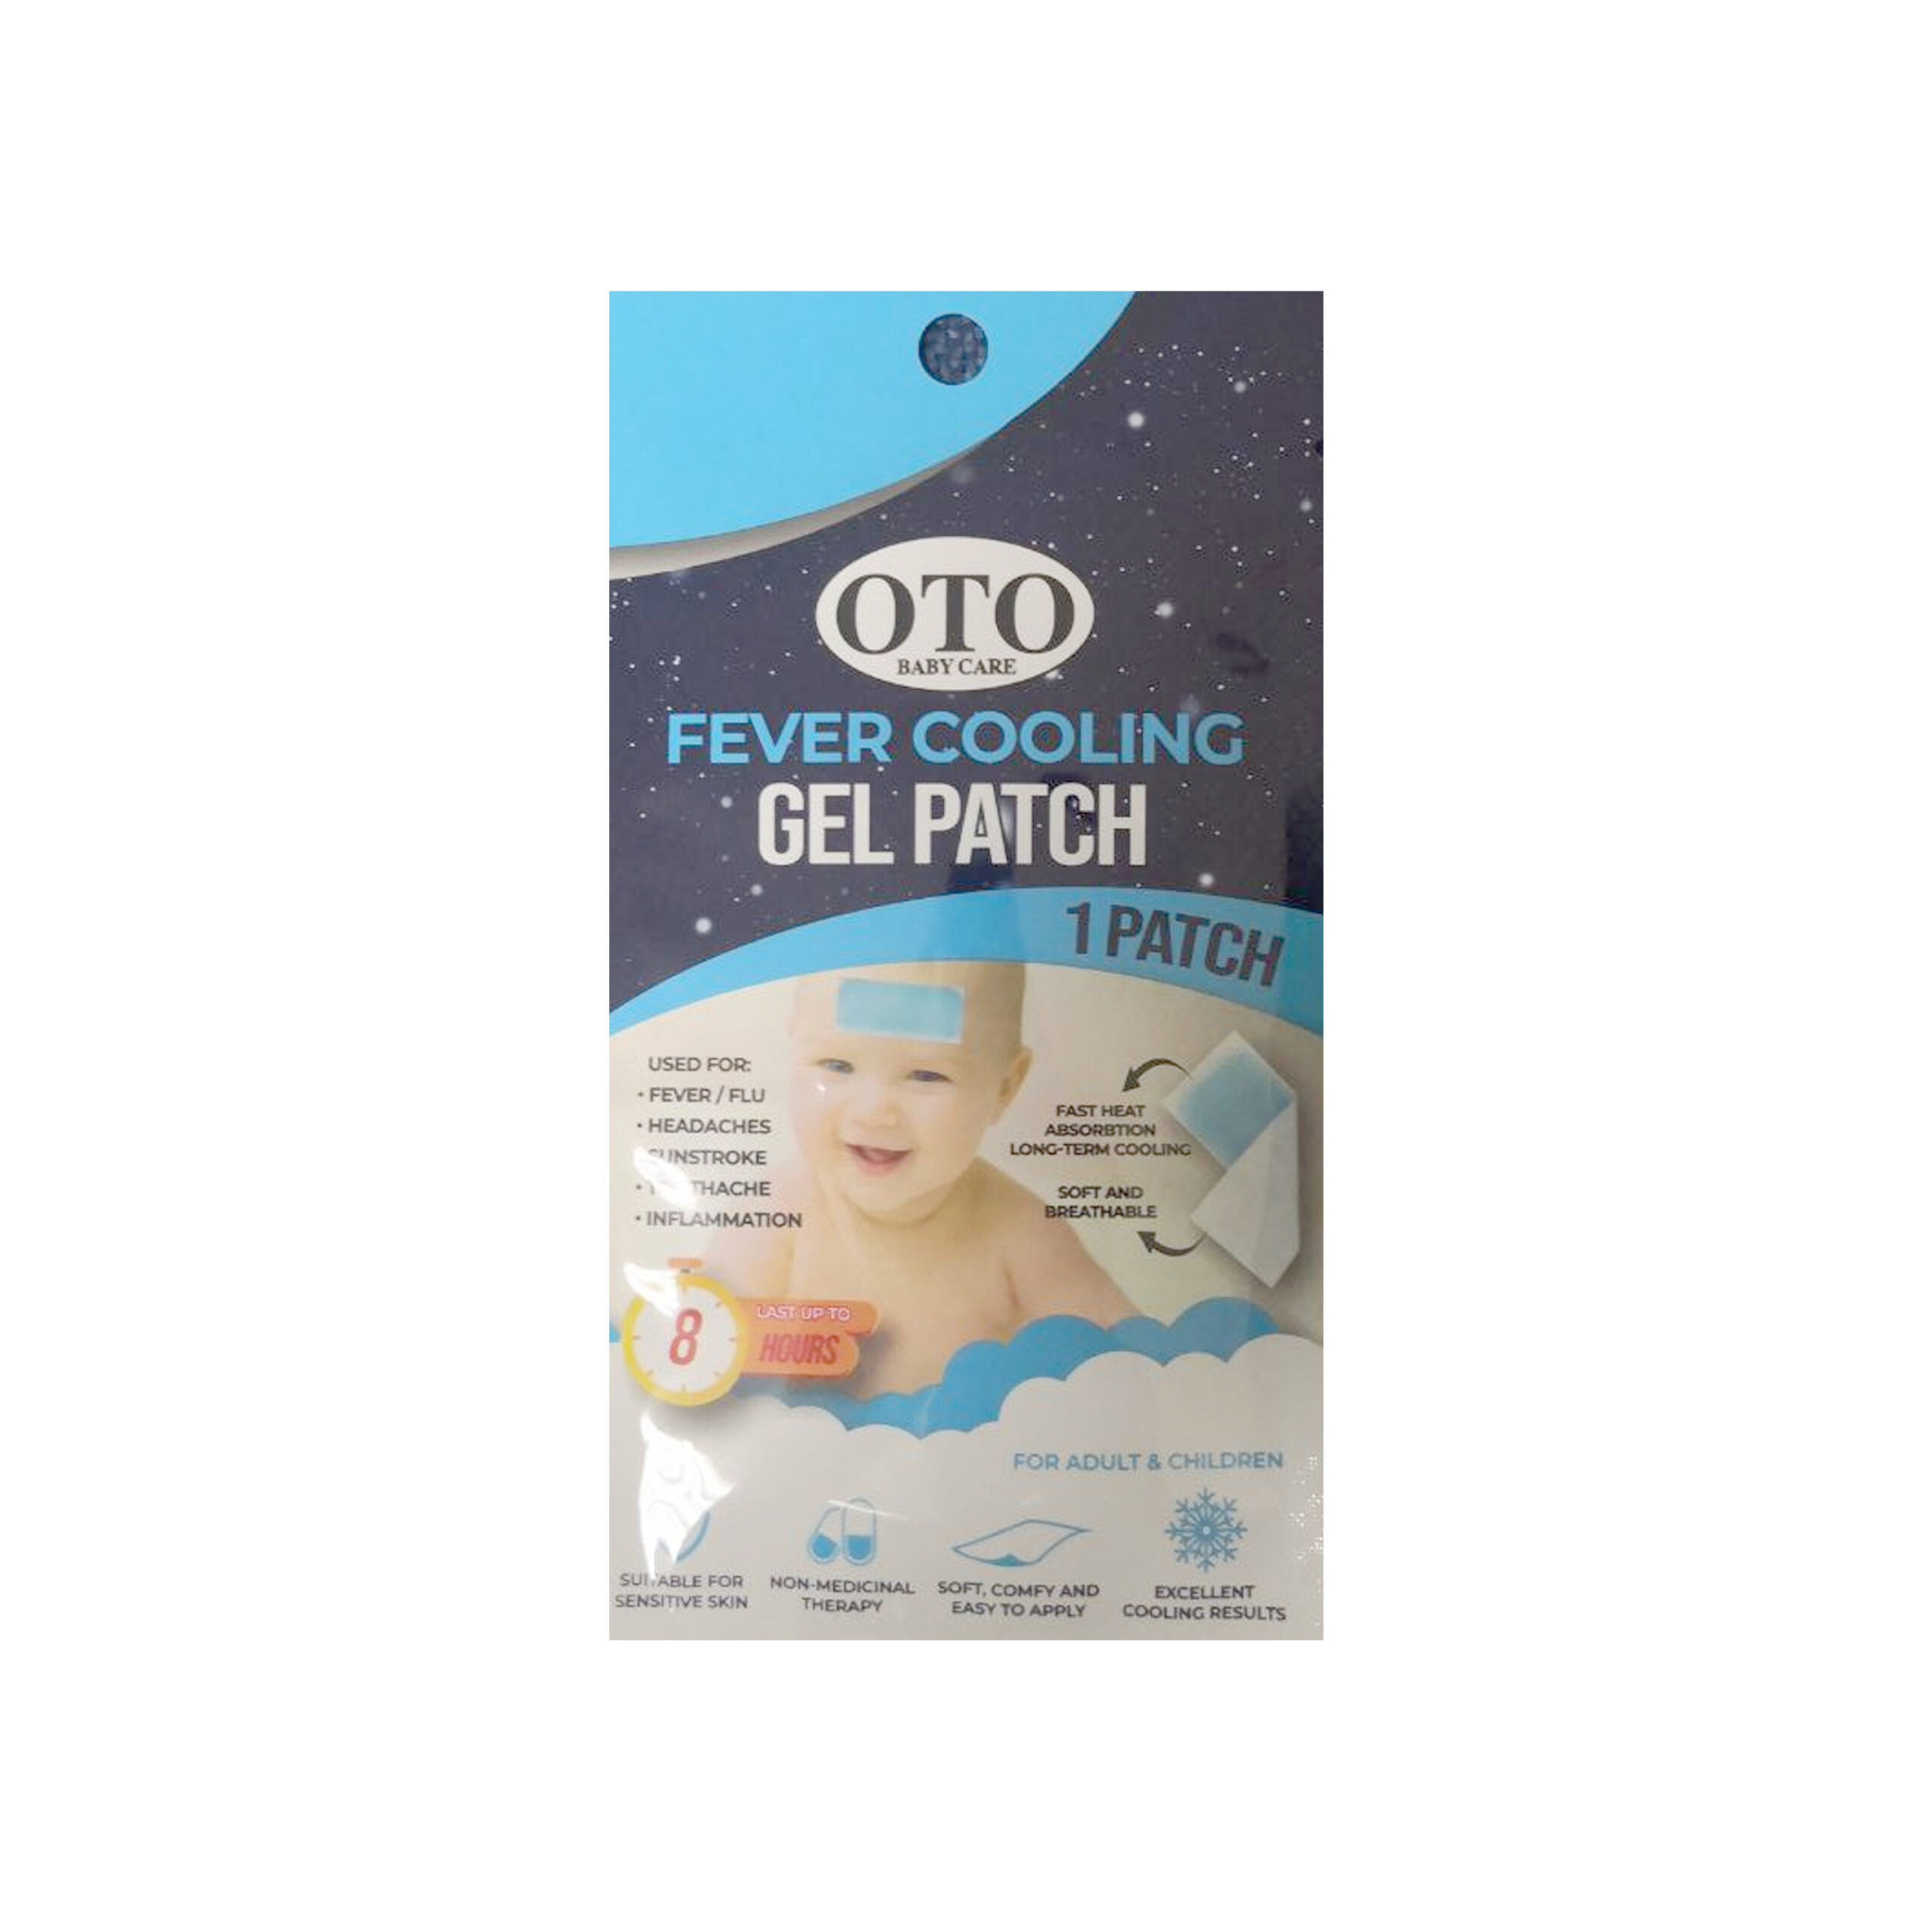 OTO GEL PATCH
FEVER COOLING